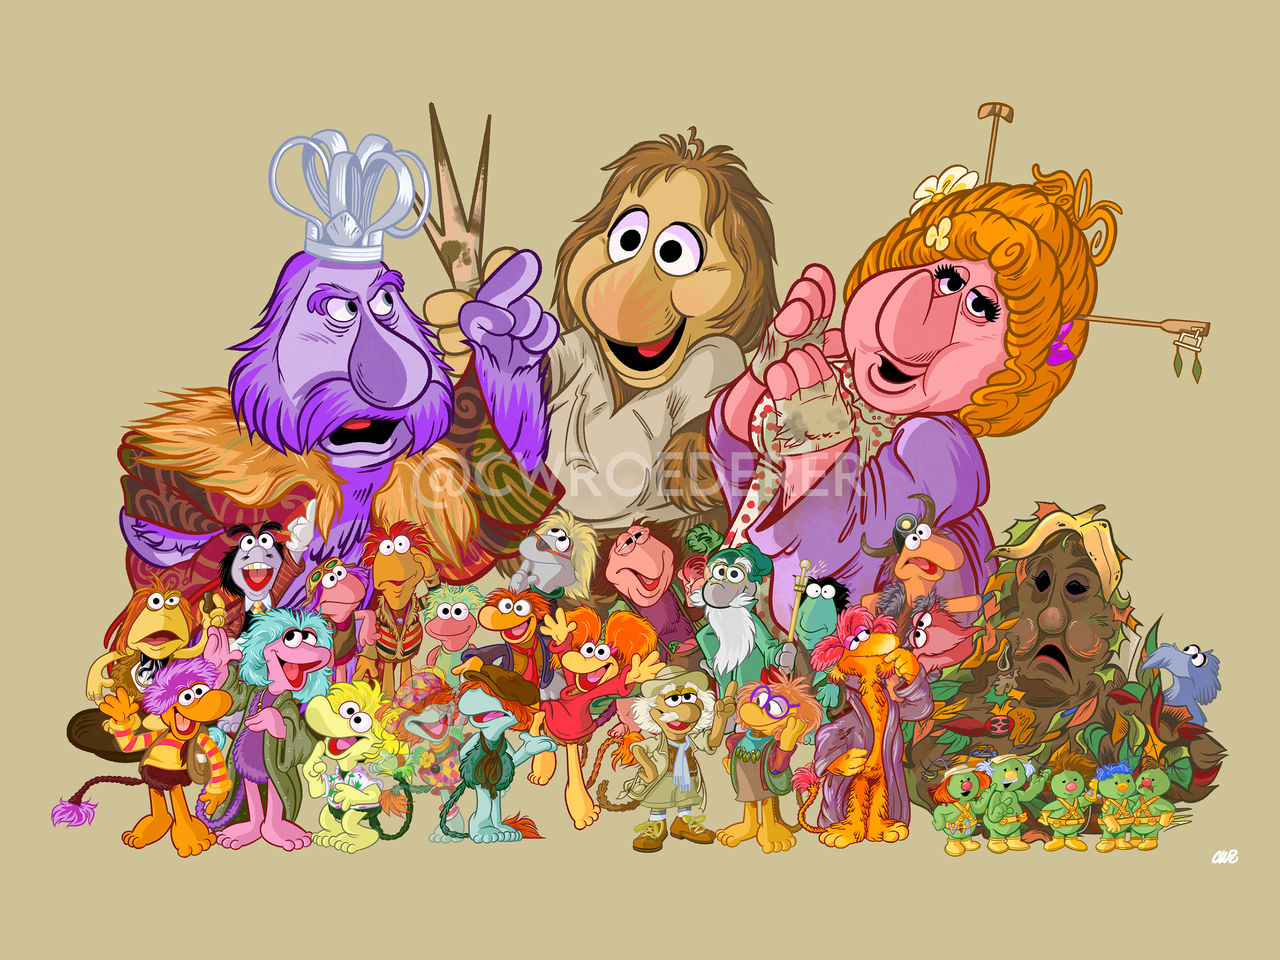 The Critters of Fraggle Rock by cwroederer on DeviantArt